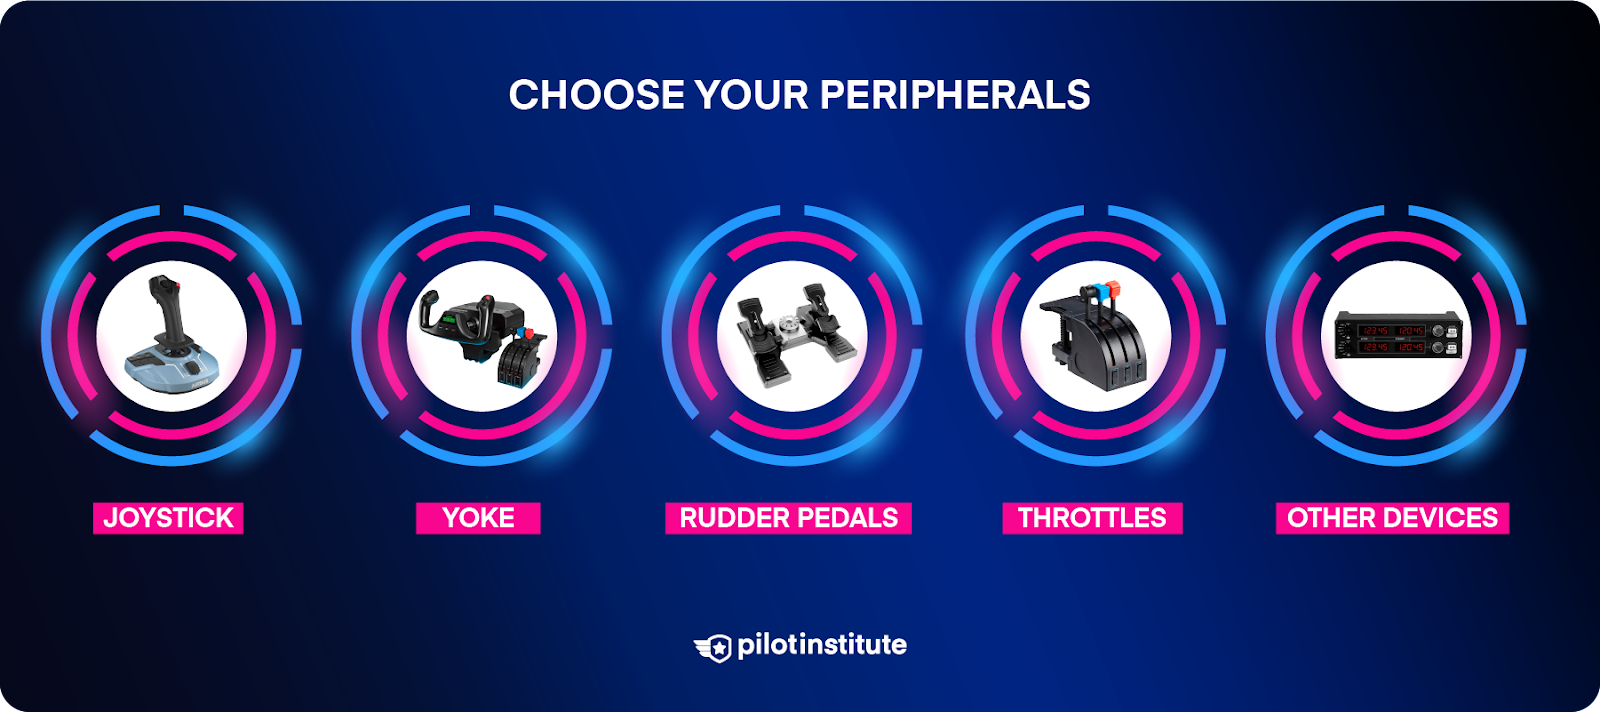 Infographic depicting peripherals such as a joystick, yoke, rudder pedals, throttles, and others.